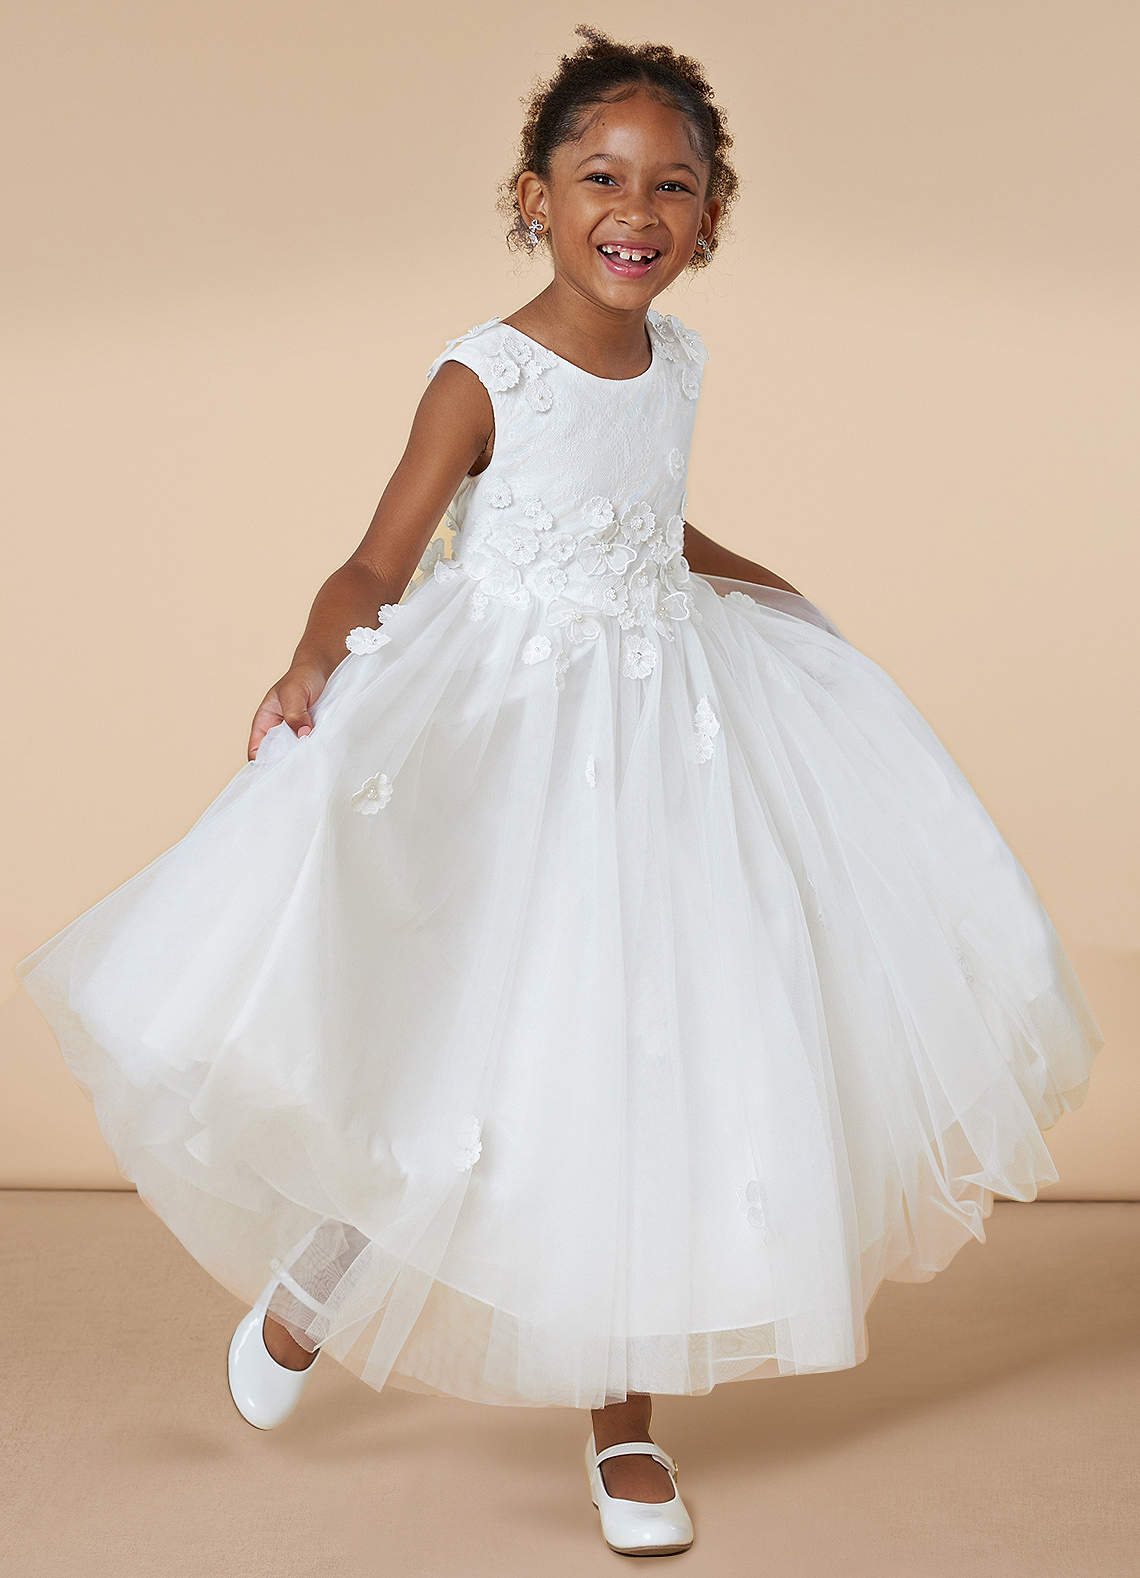 White Flower Girl Dress,tulle and Lace Flower Girl Dress, First Comunion  Dress,white Tulle Dress,flower Girl Dresses,baby Toddler Dress 97 